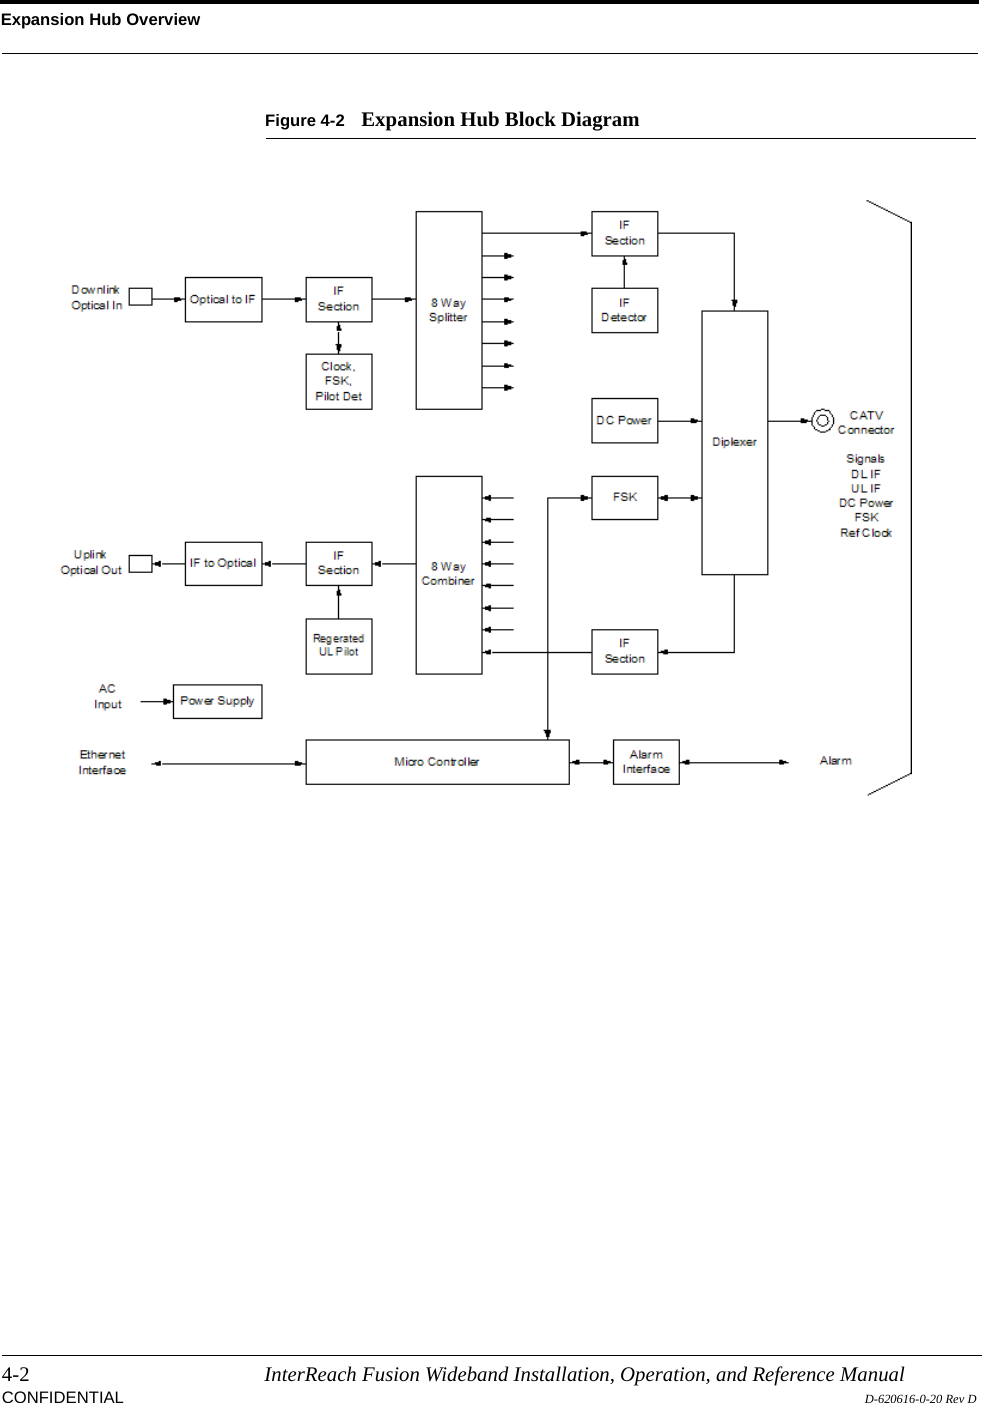 Expansion Hub Overview4-2 InterReach Fusion Wideband Installation, Operation, and Reference ManualCONFIDENTIAL D-620616-0-20 Rev DFigure 4-2 Expansion Hub Block Diagram